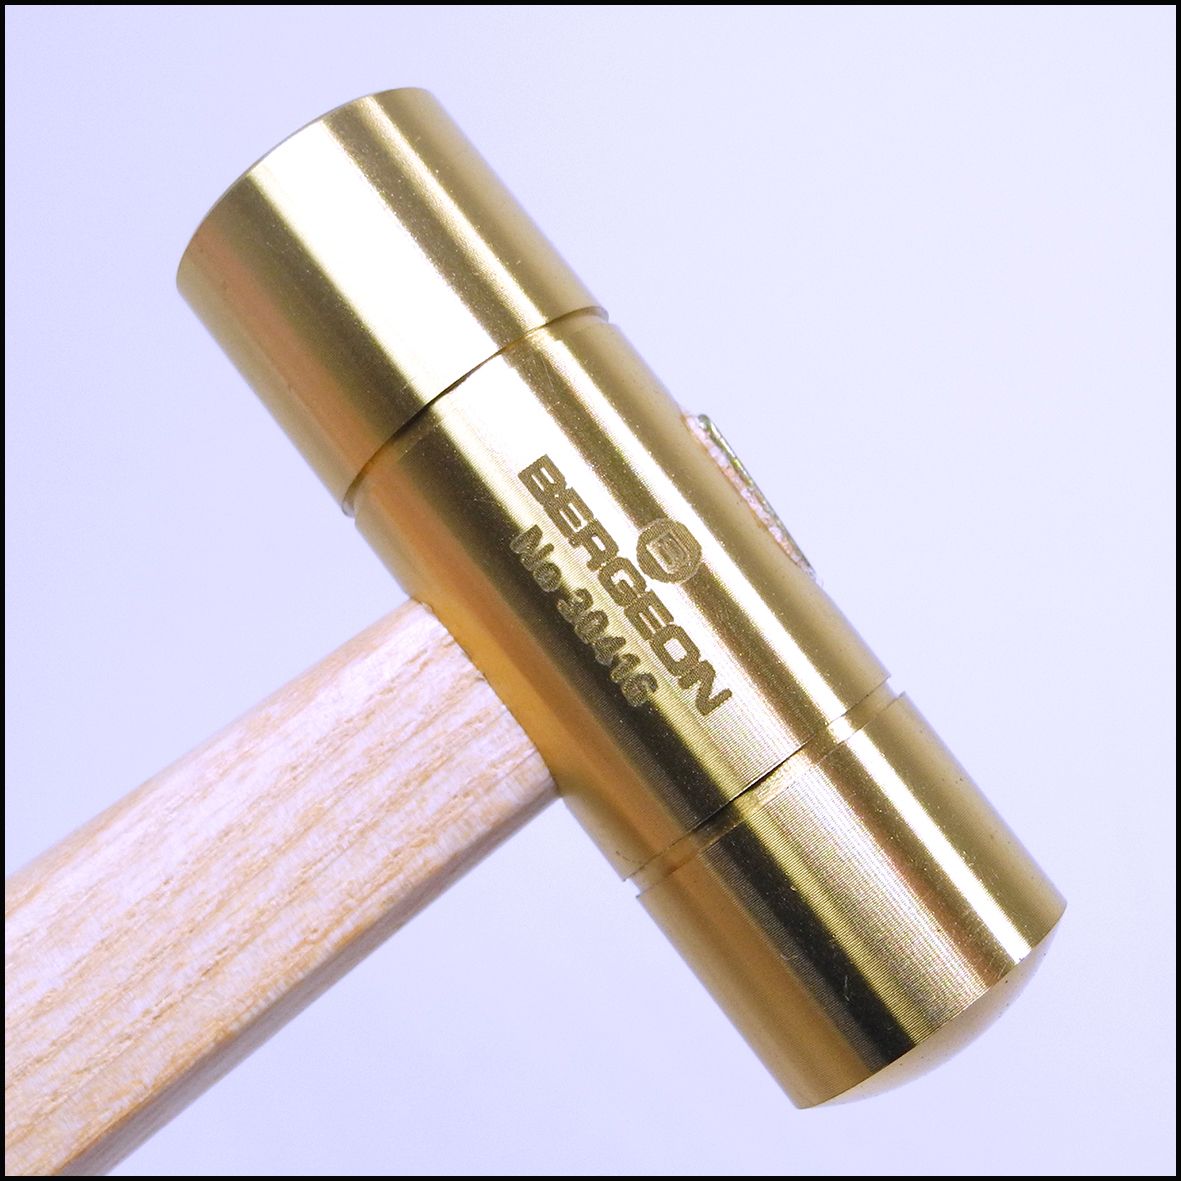 Bergeon 30416 - Hammer for watchmakers Wooden handle - in brass